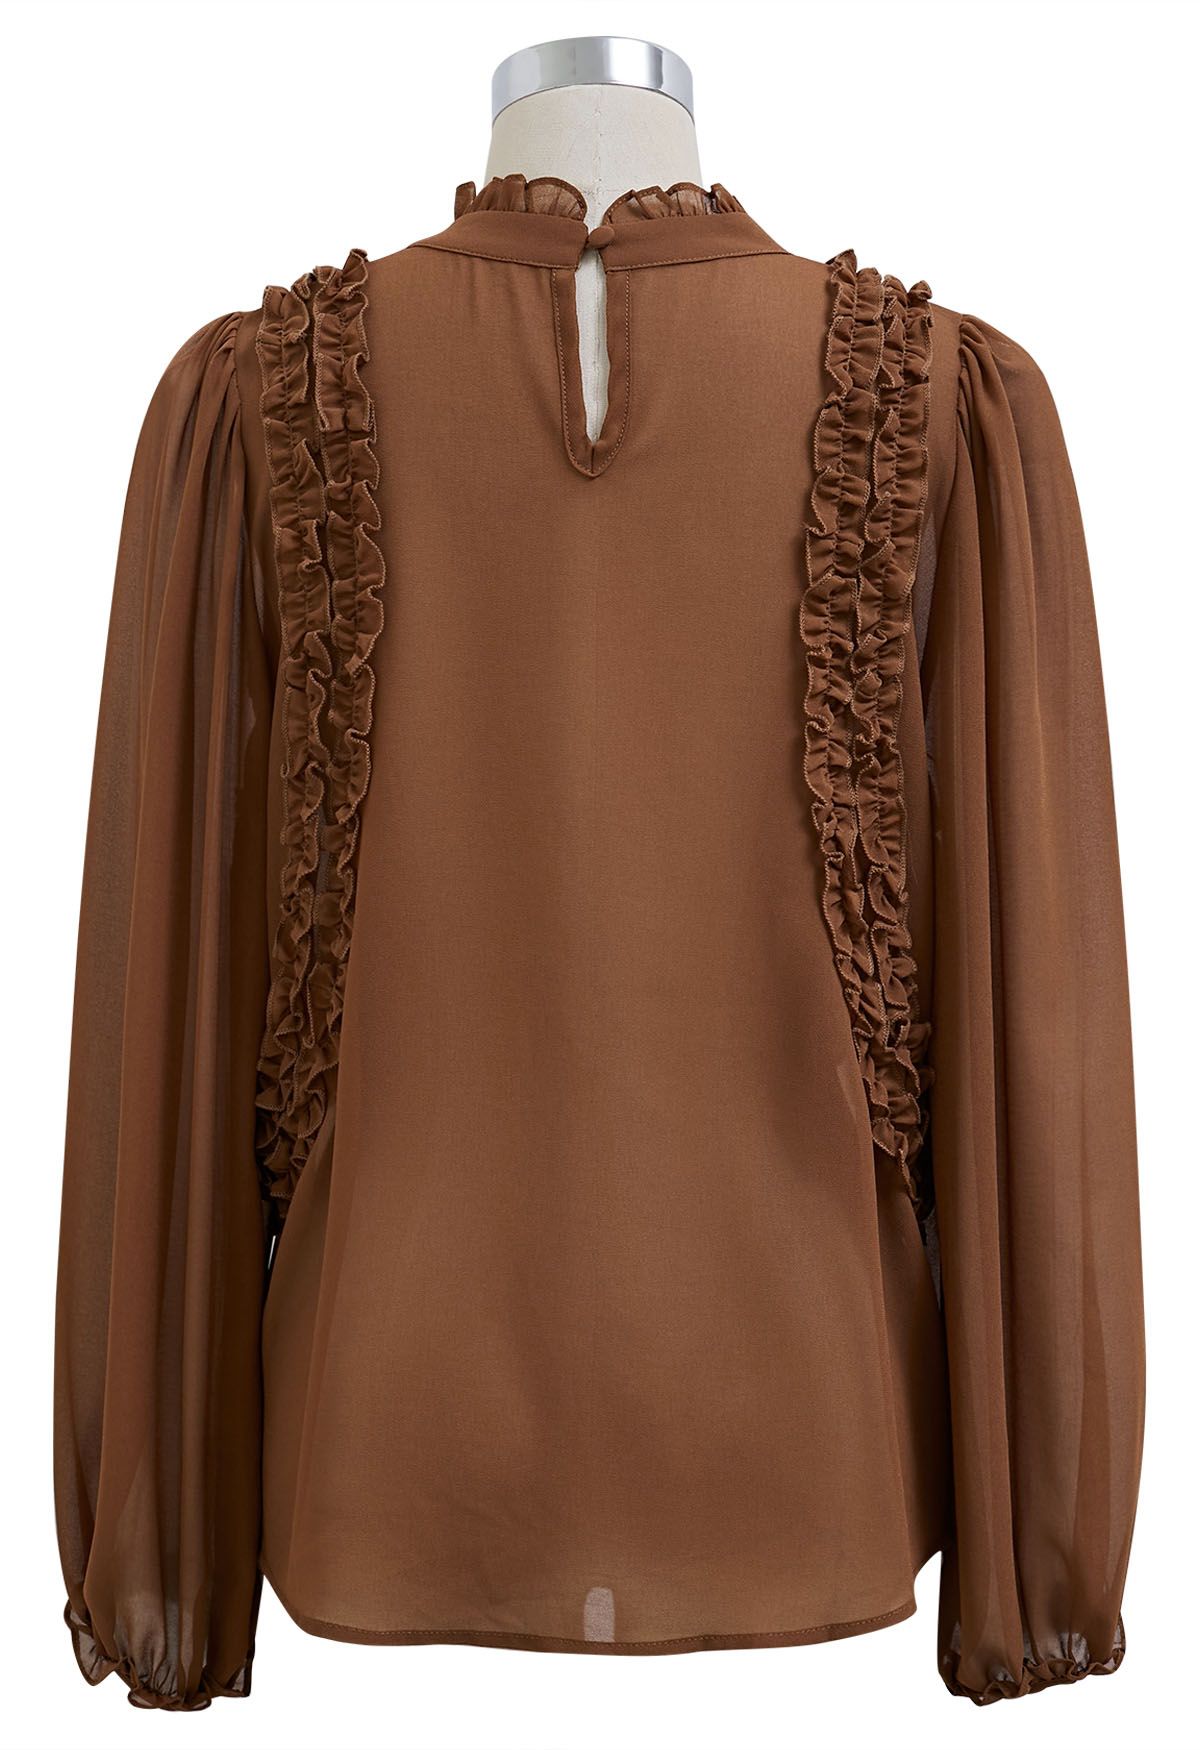 Ruffle Adorned Bubble Sleeves Chiffon Top in Caramel - Retro, Indie and ...